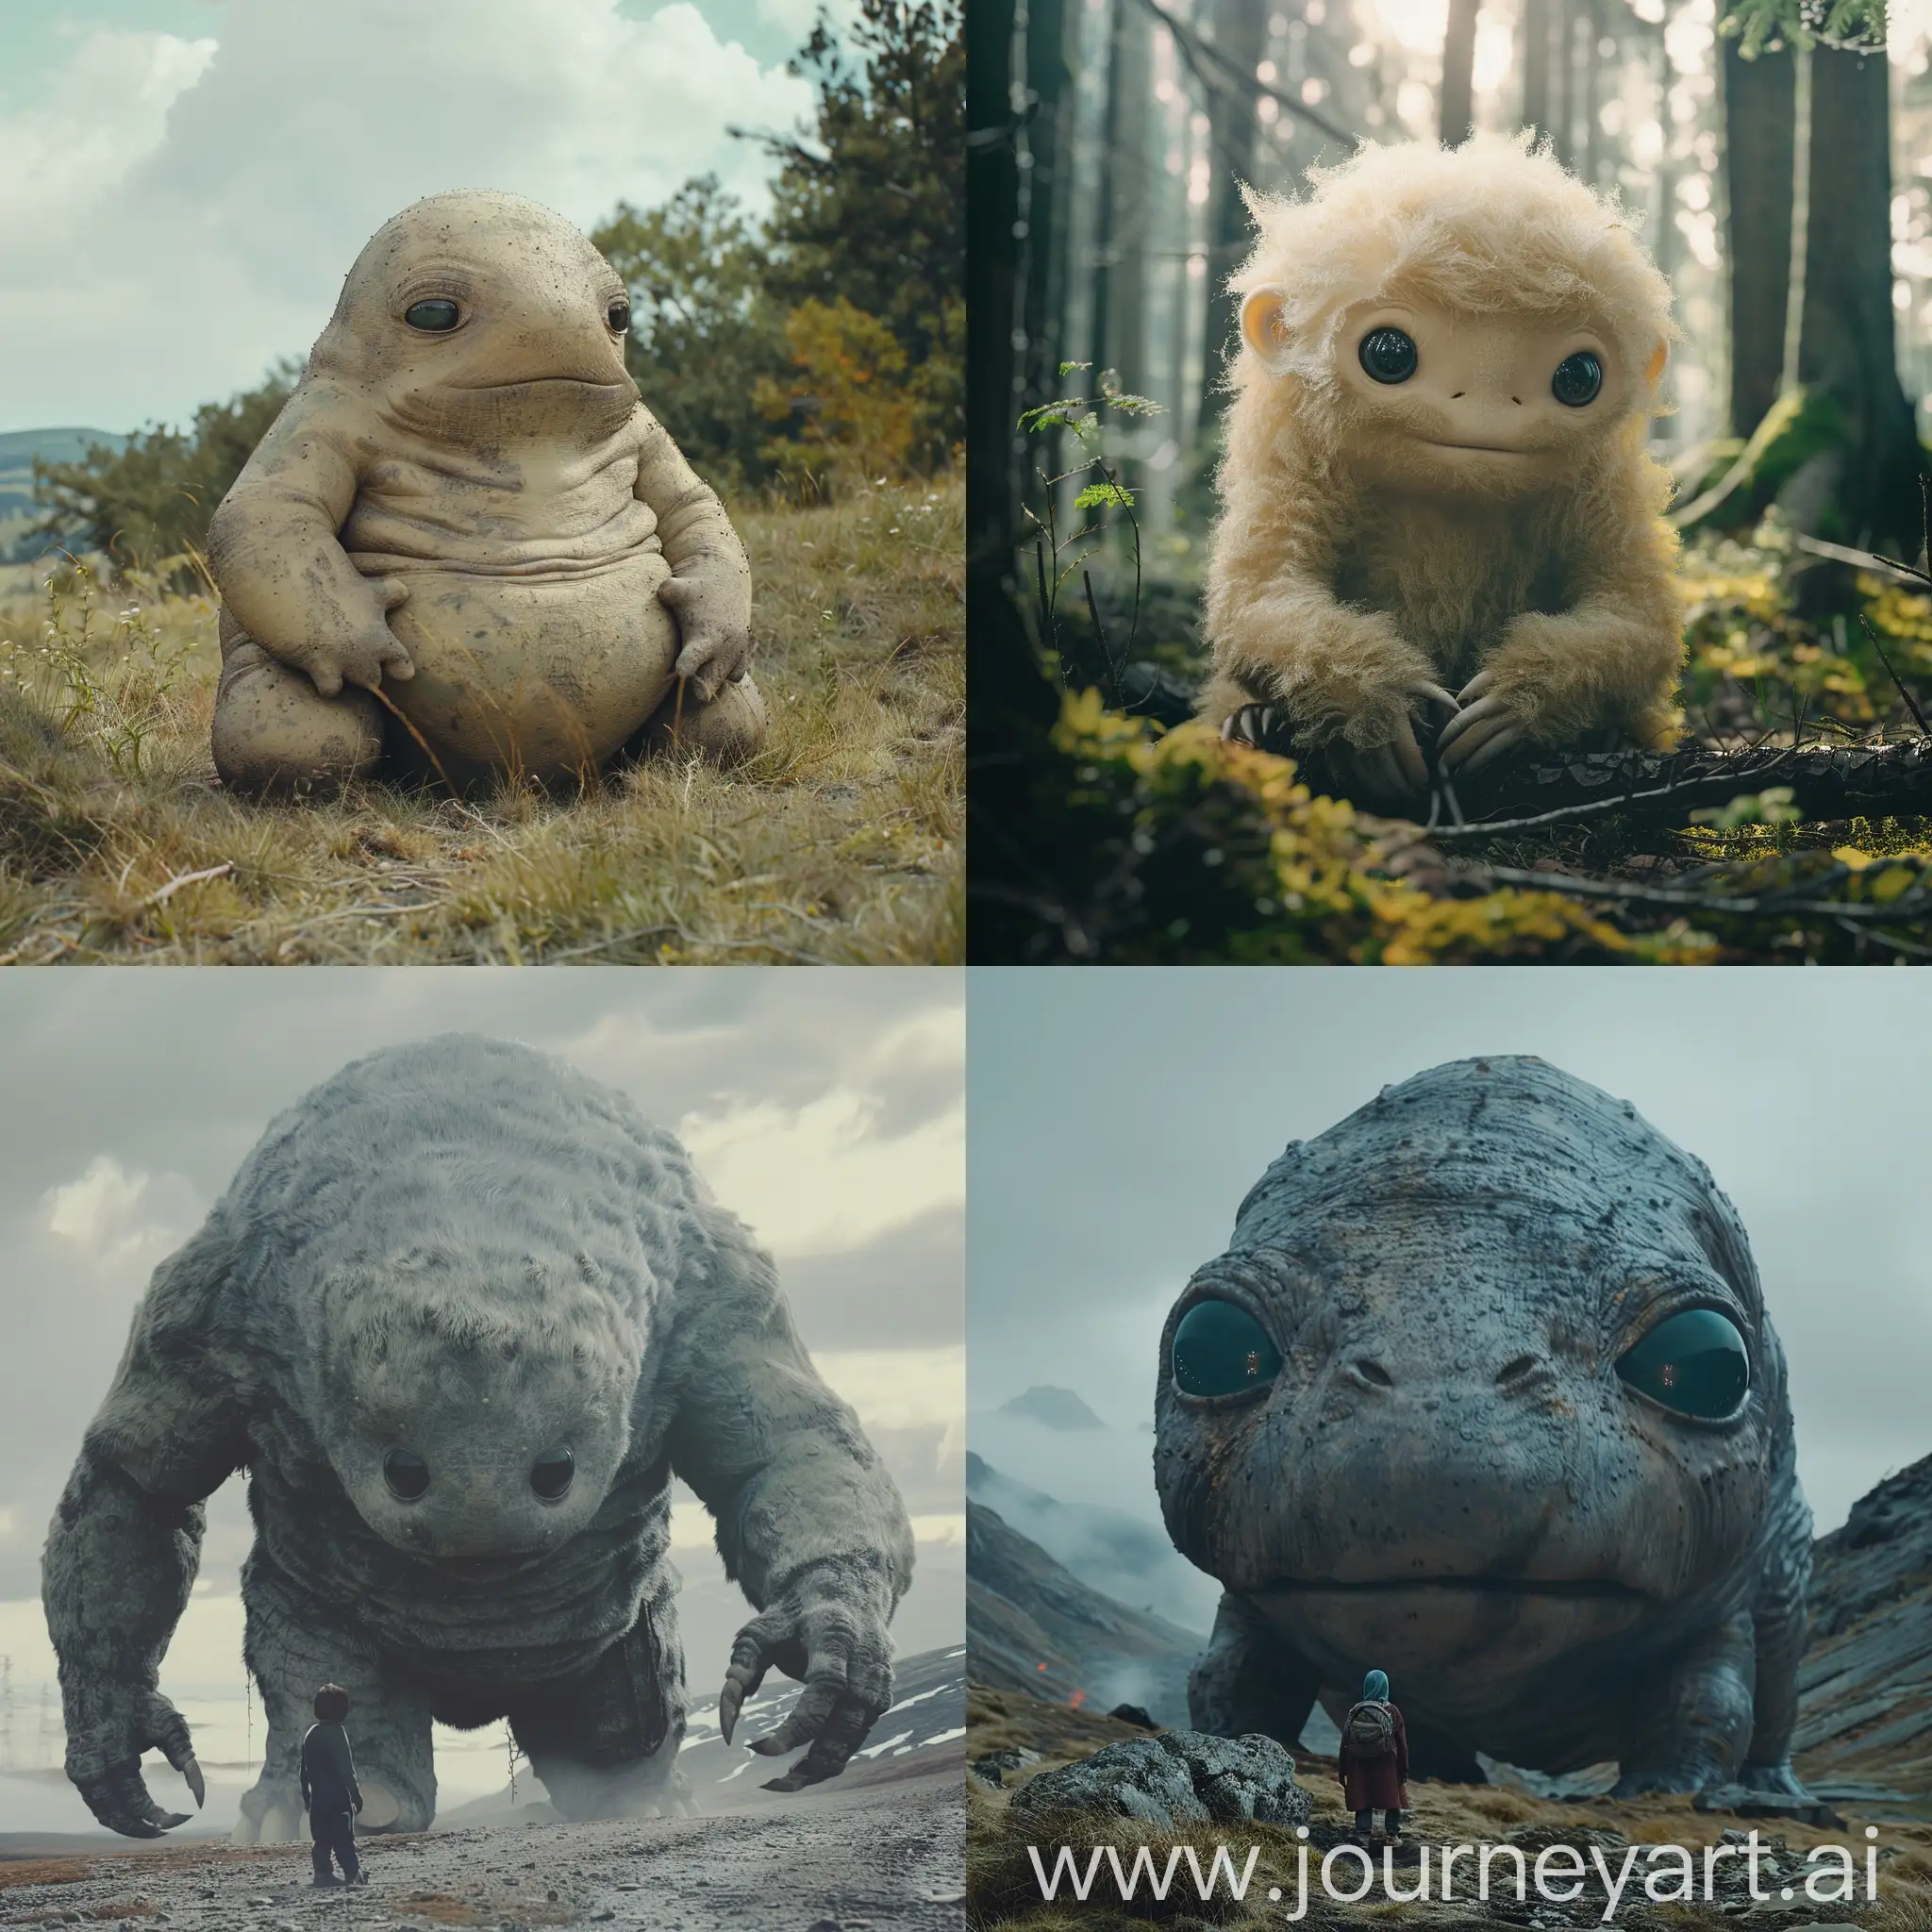 Adorable-Giant-Creature-in-Realistic-VHS-Style-Setting